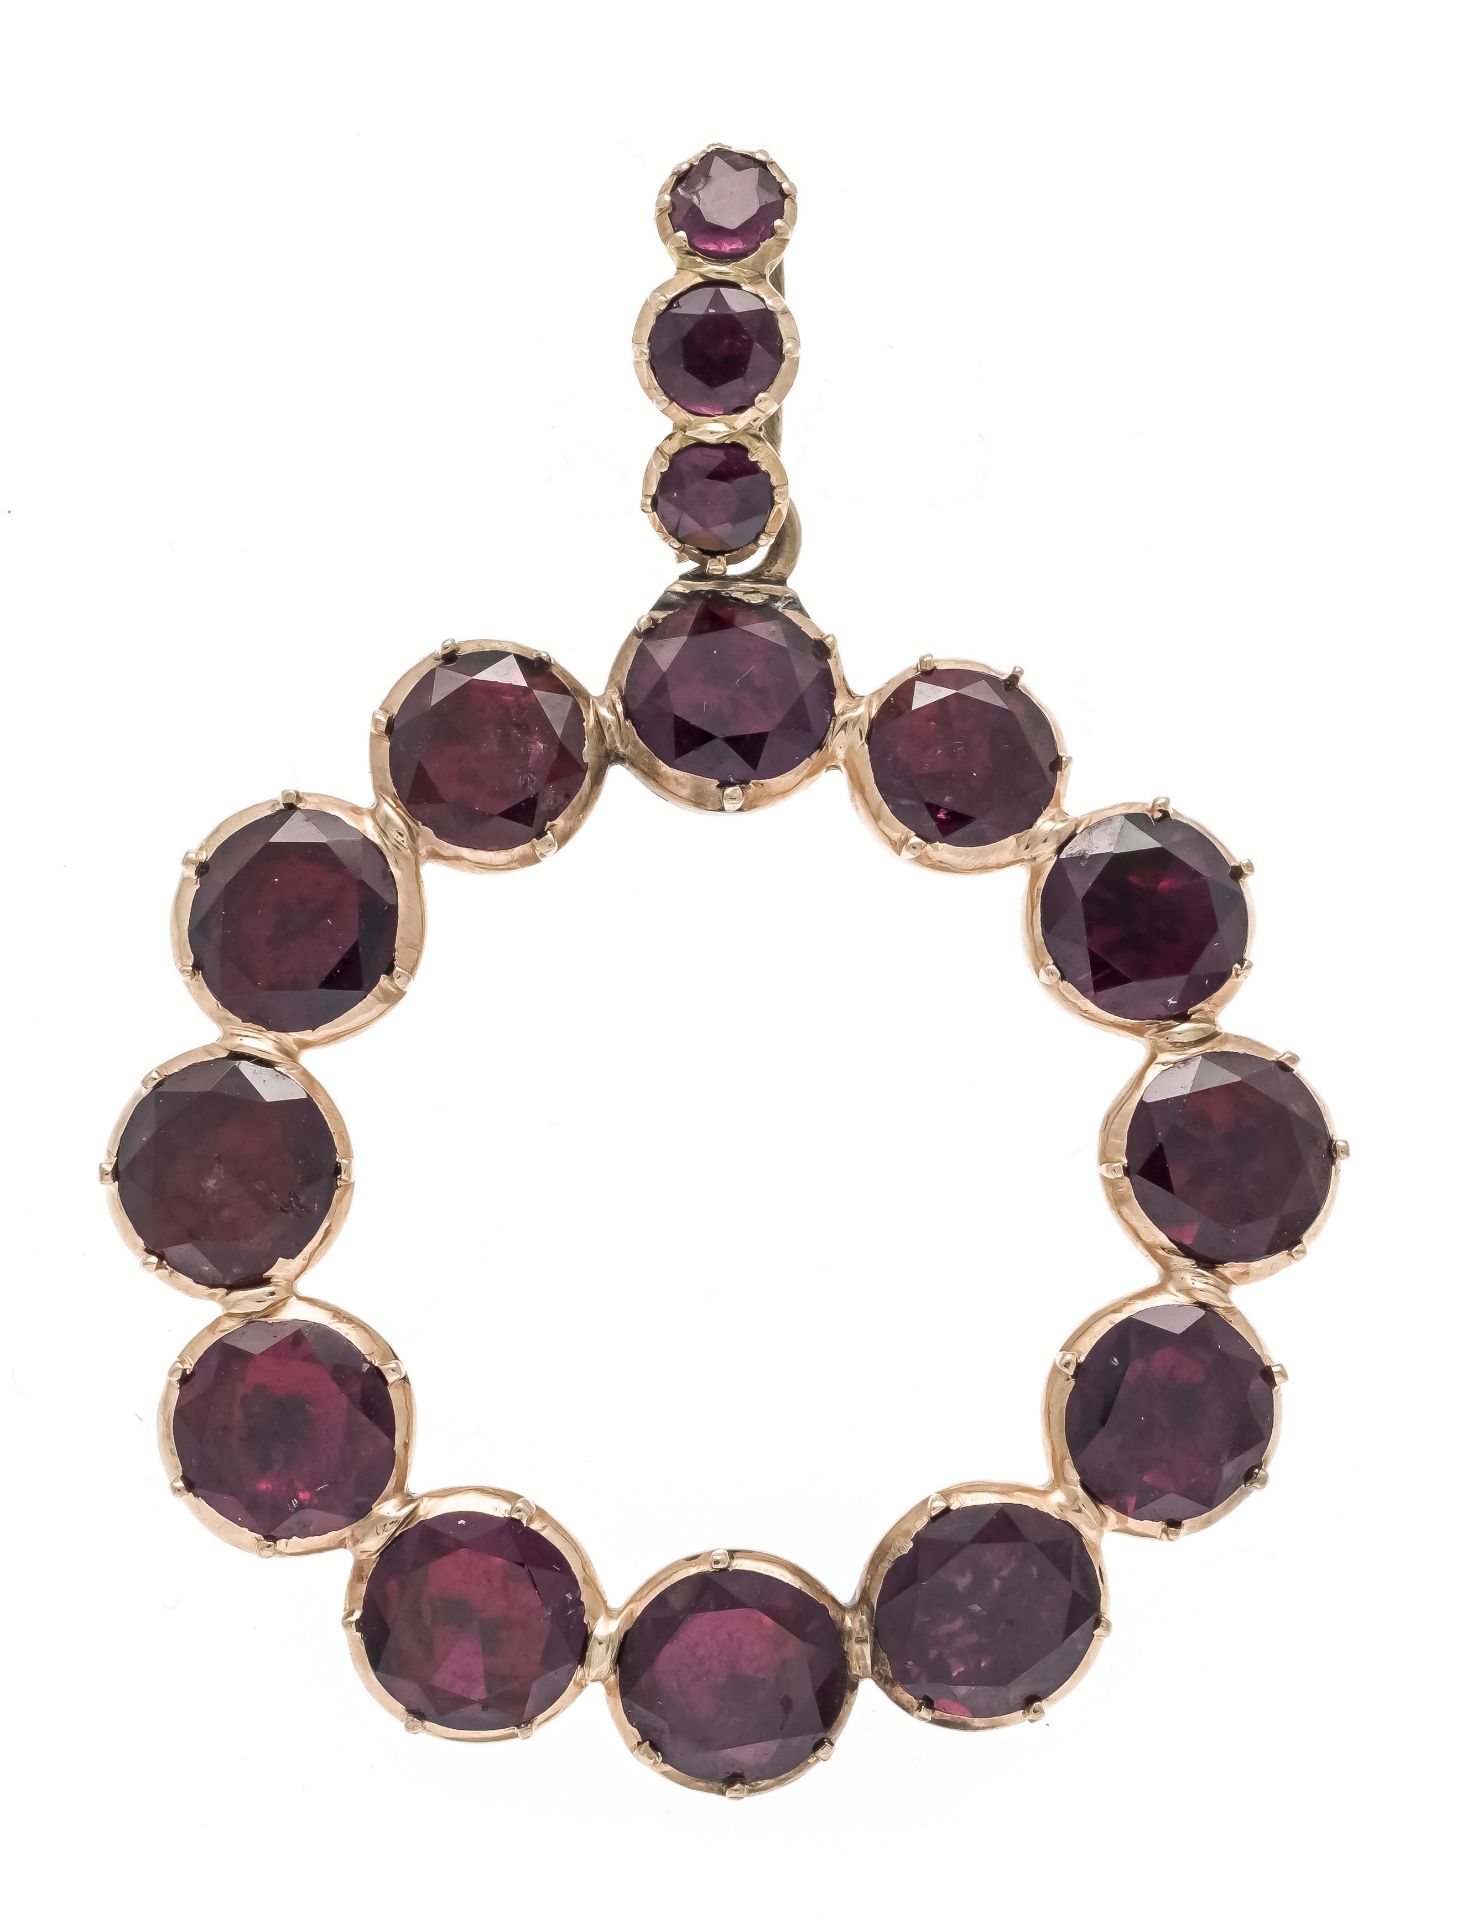 Garnet pendant RG 416/000 with partially gold-plated eyelet, unmarked, tested, with 12 and 3 round